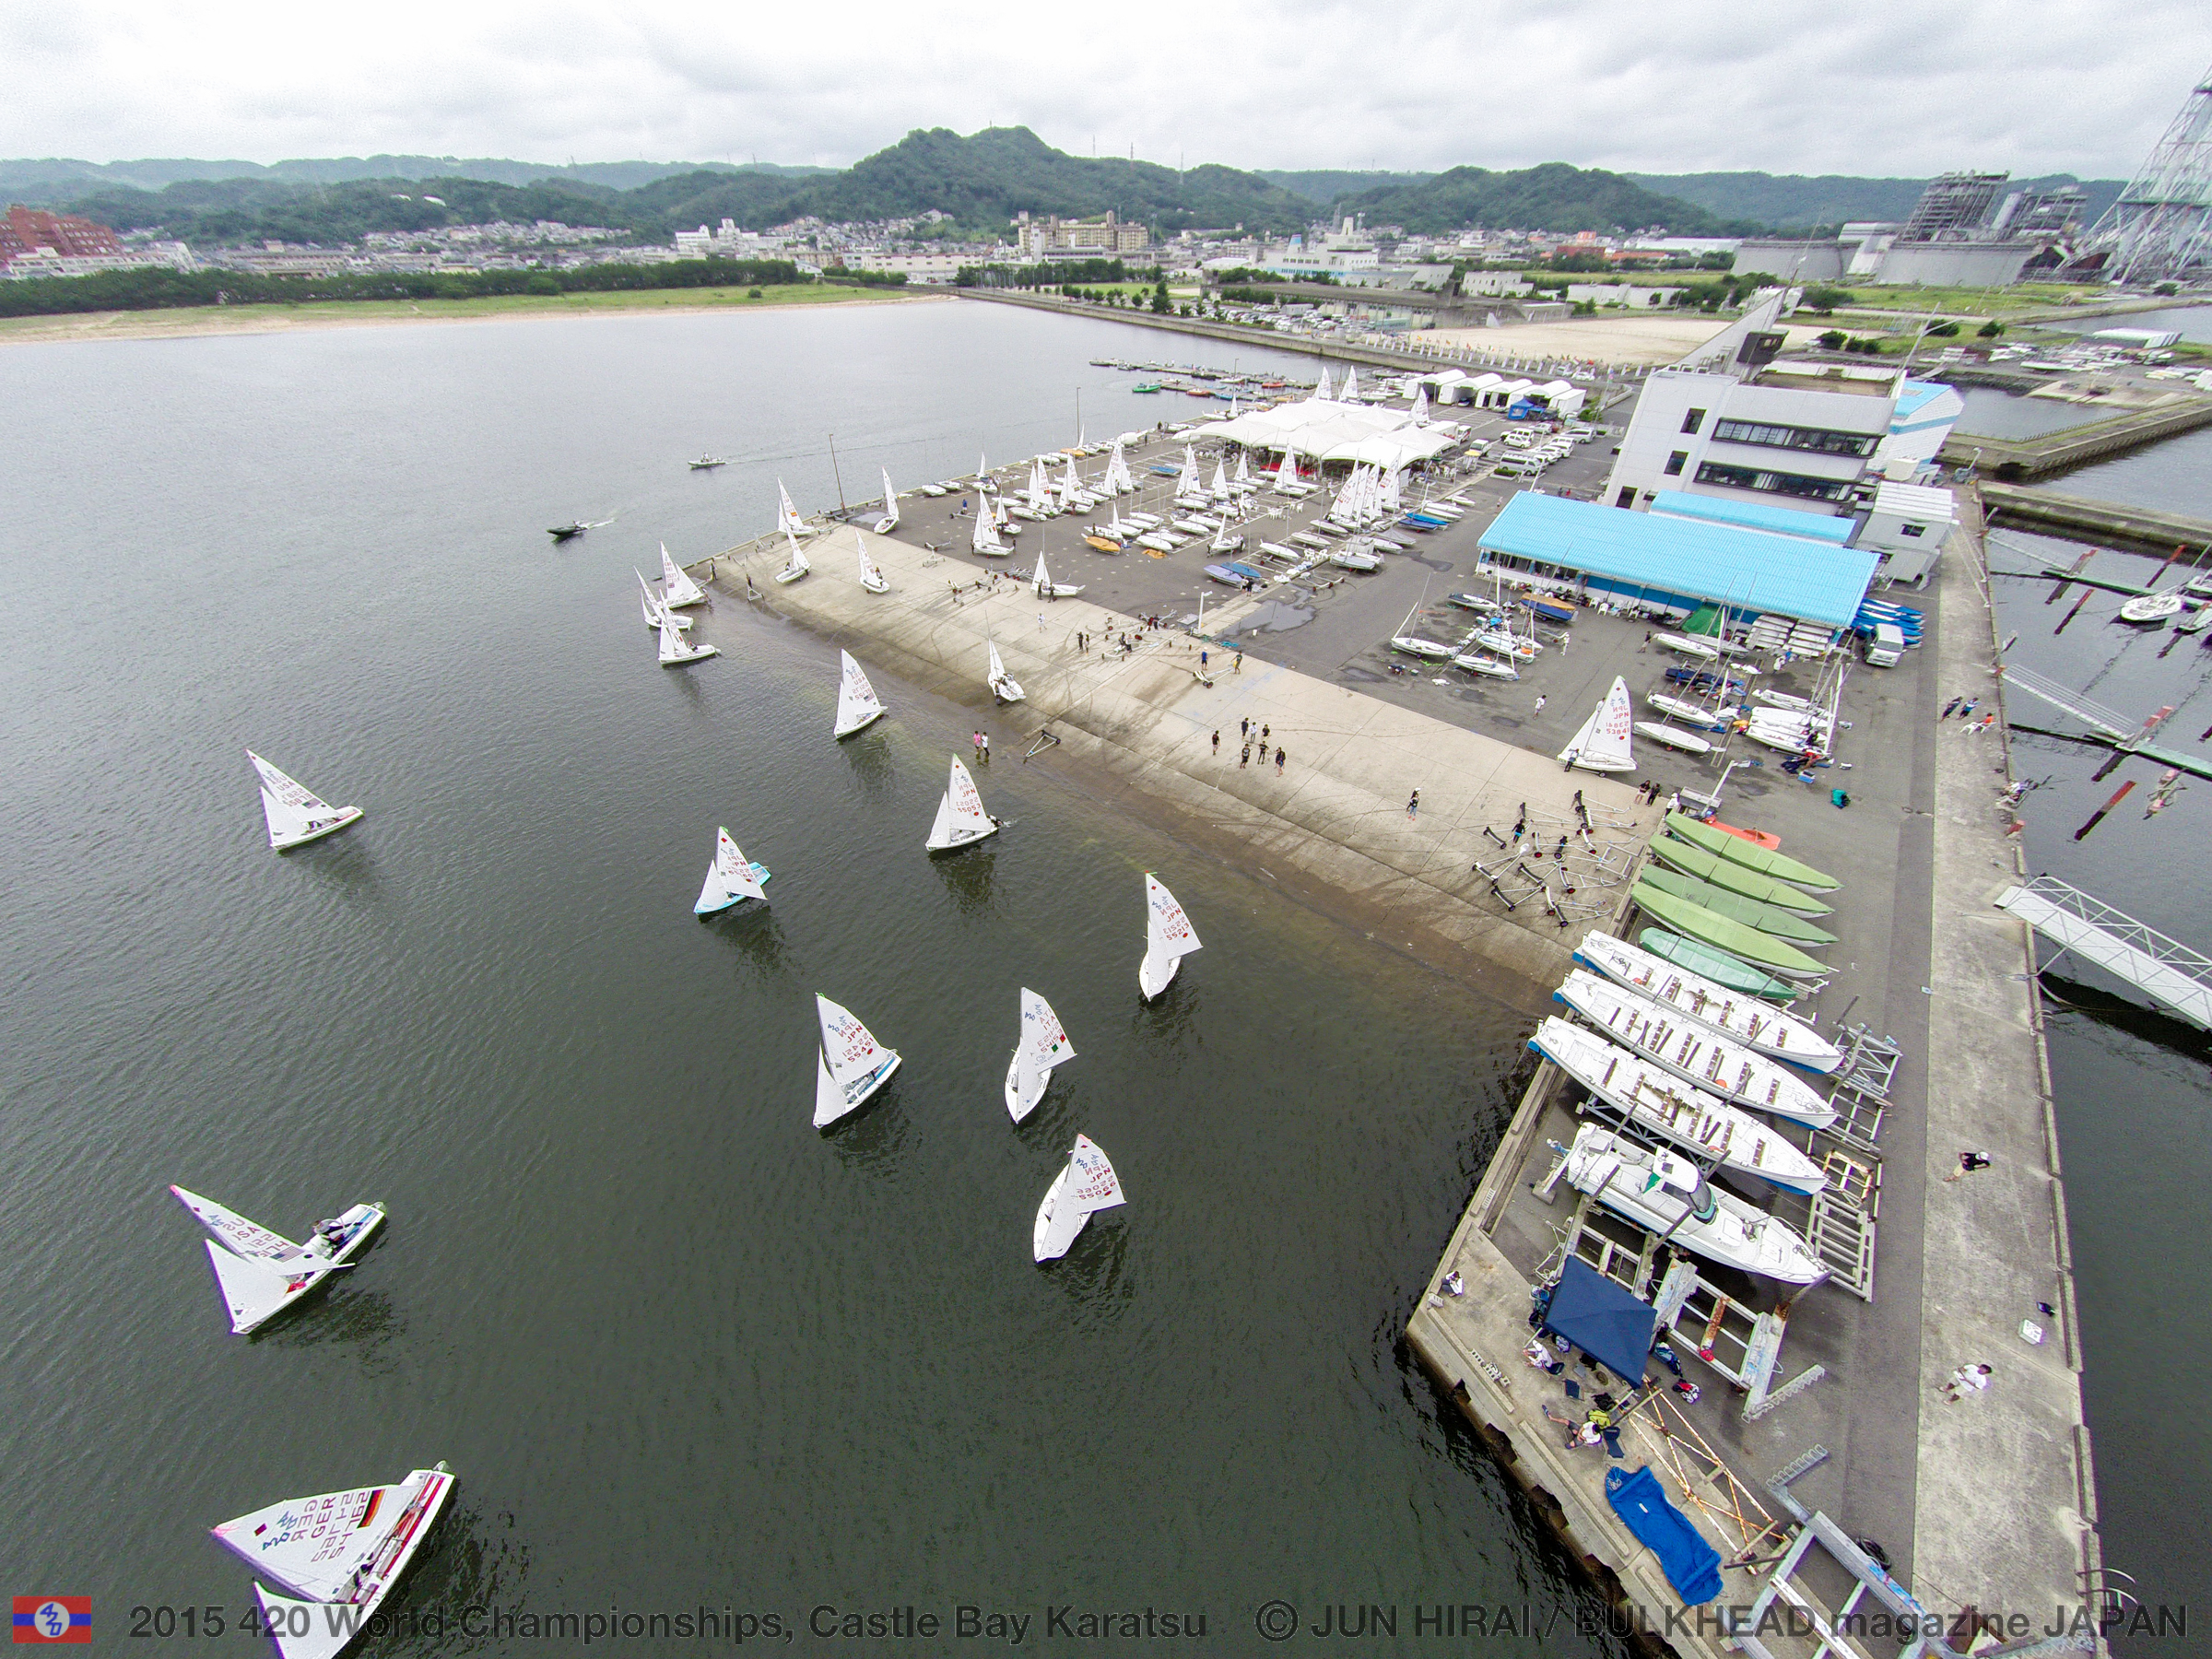 Aerial view of the Yacht Harbour